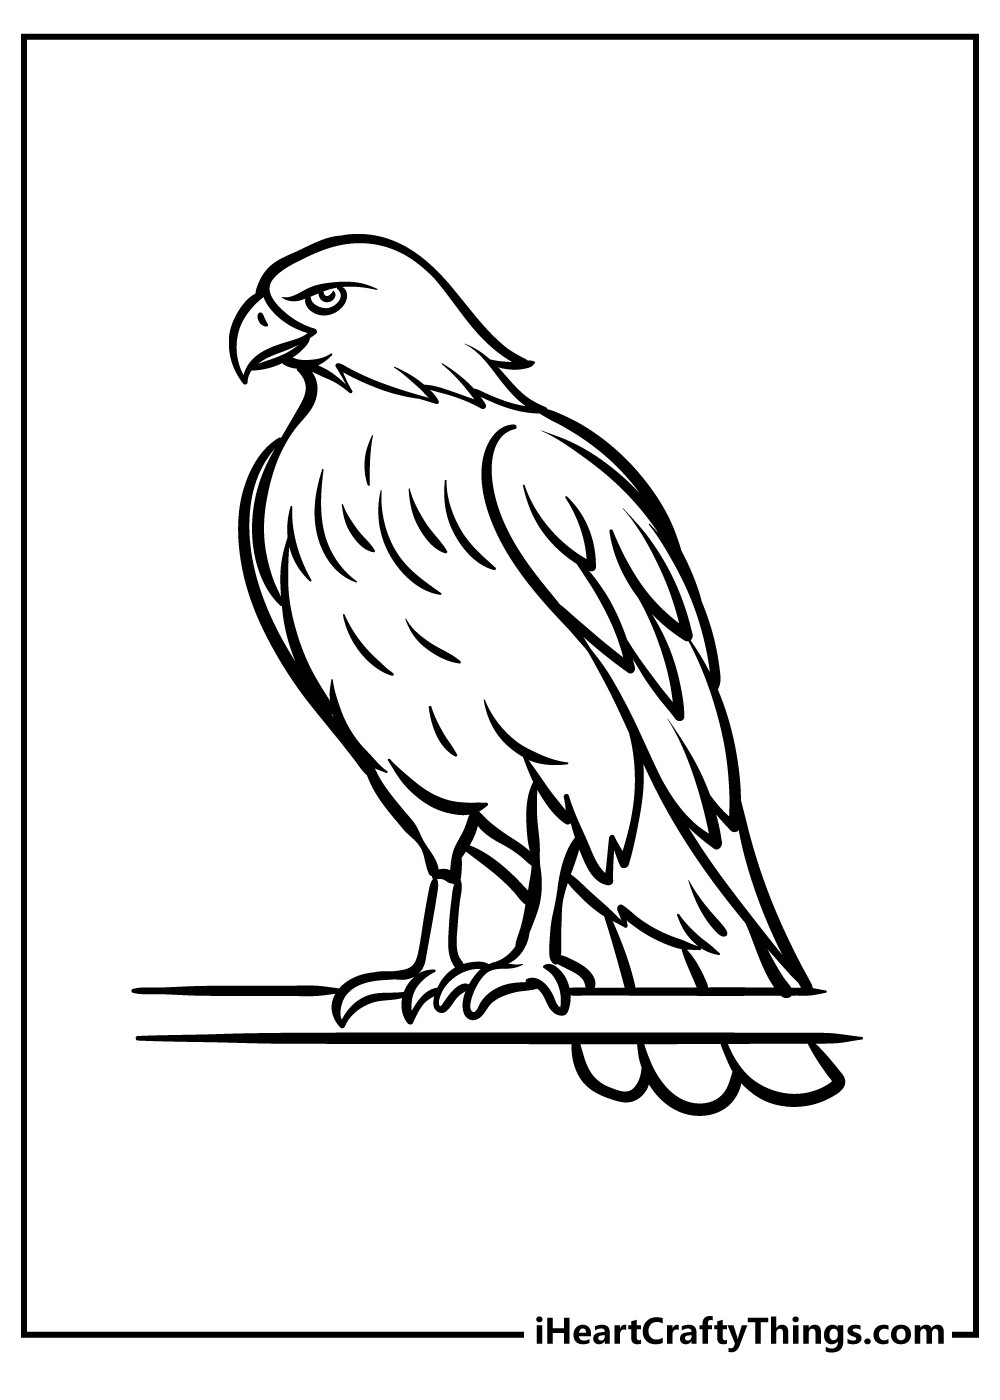 Hawk Coloring Pages free pdf download